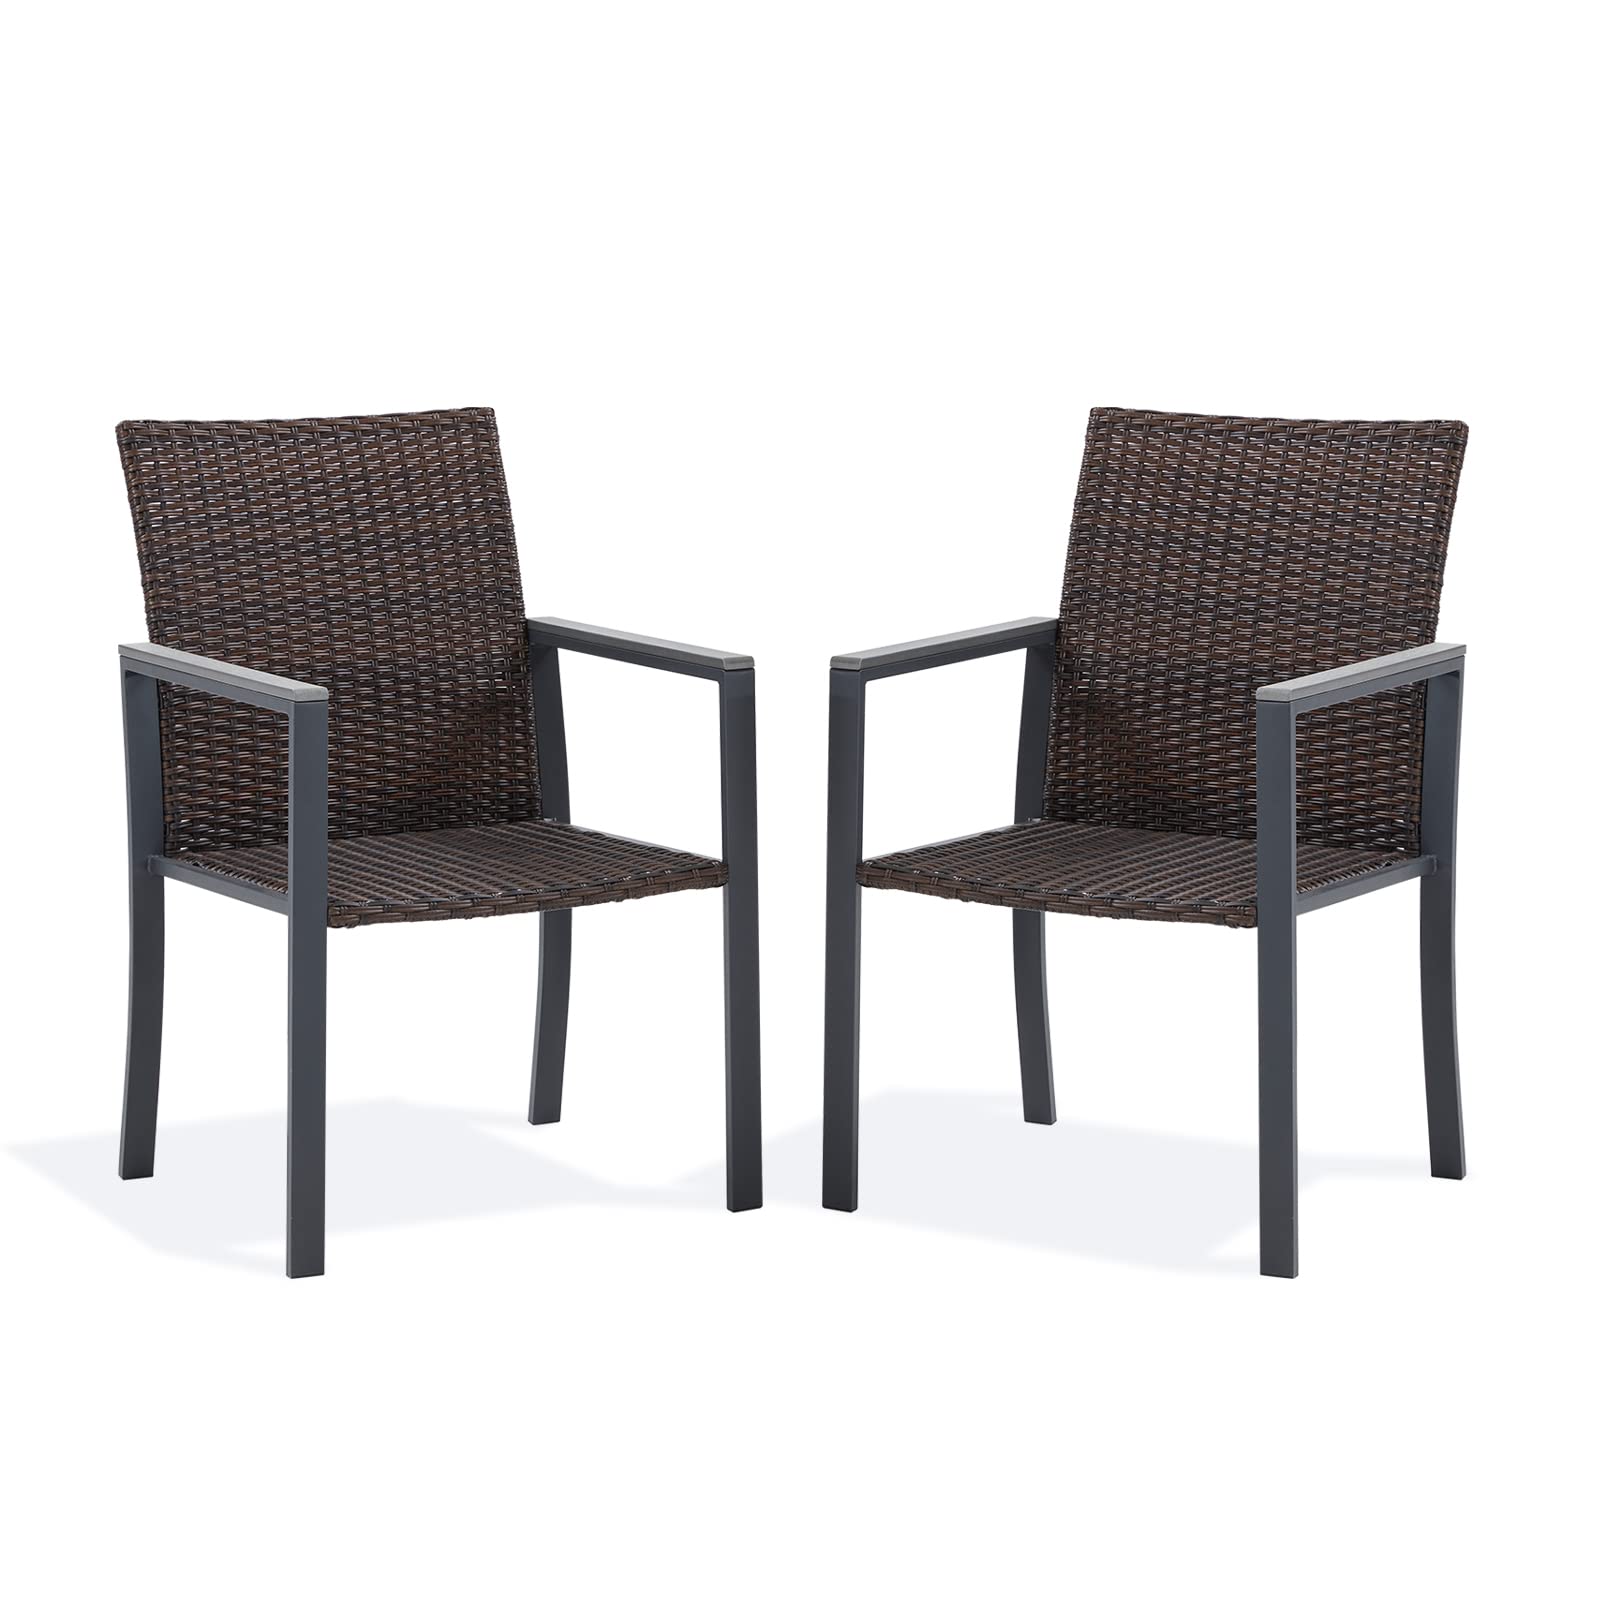 Vicllax Patio Wicker Dining Chairs Set of 2/4/6, Outdoor Dining Chairs with Armrests